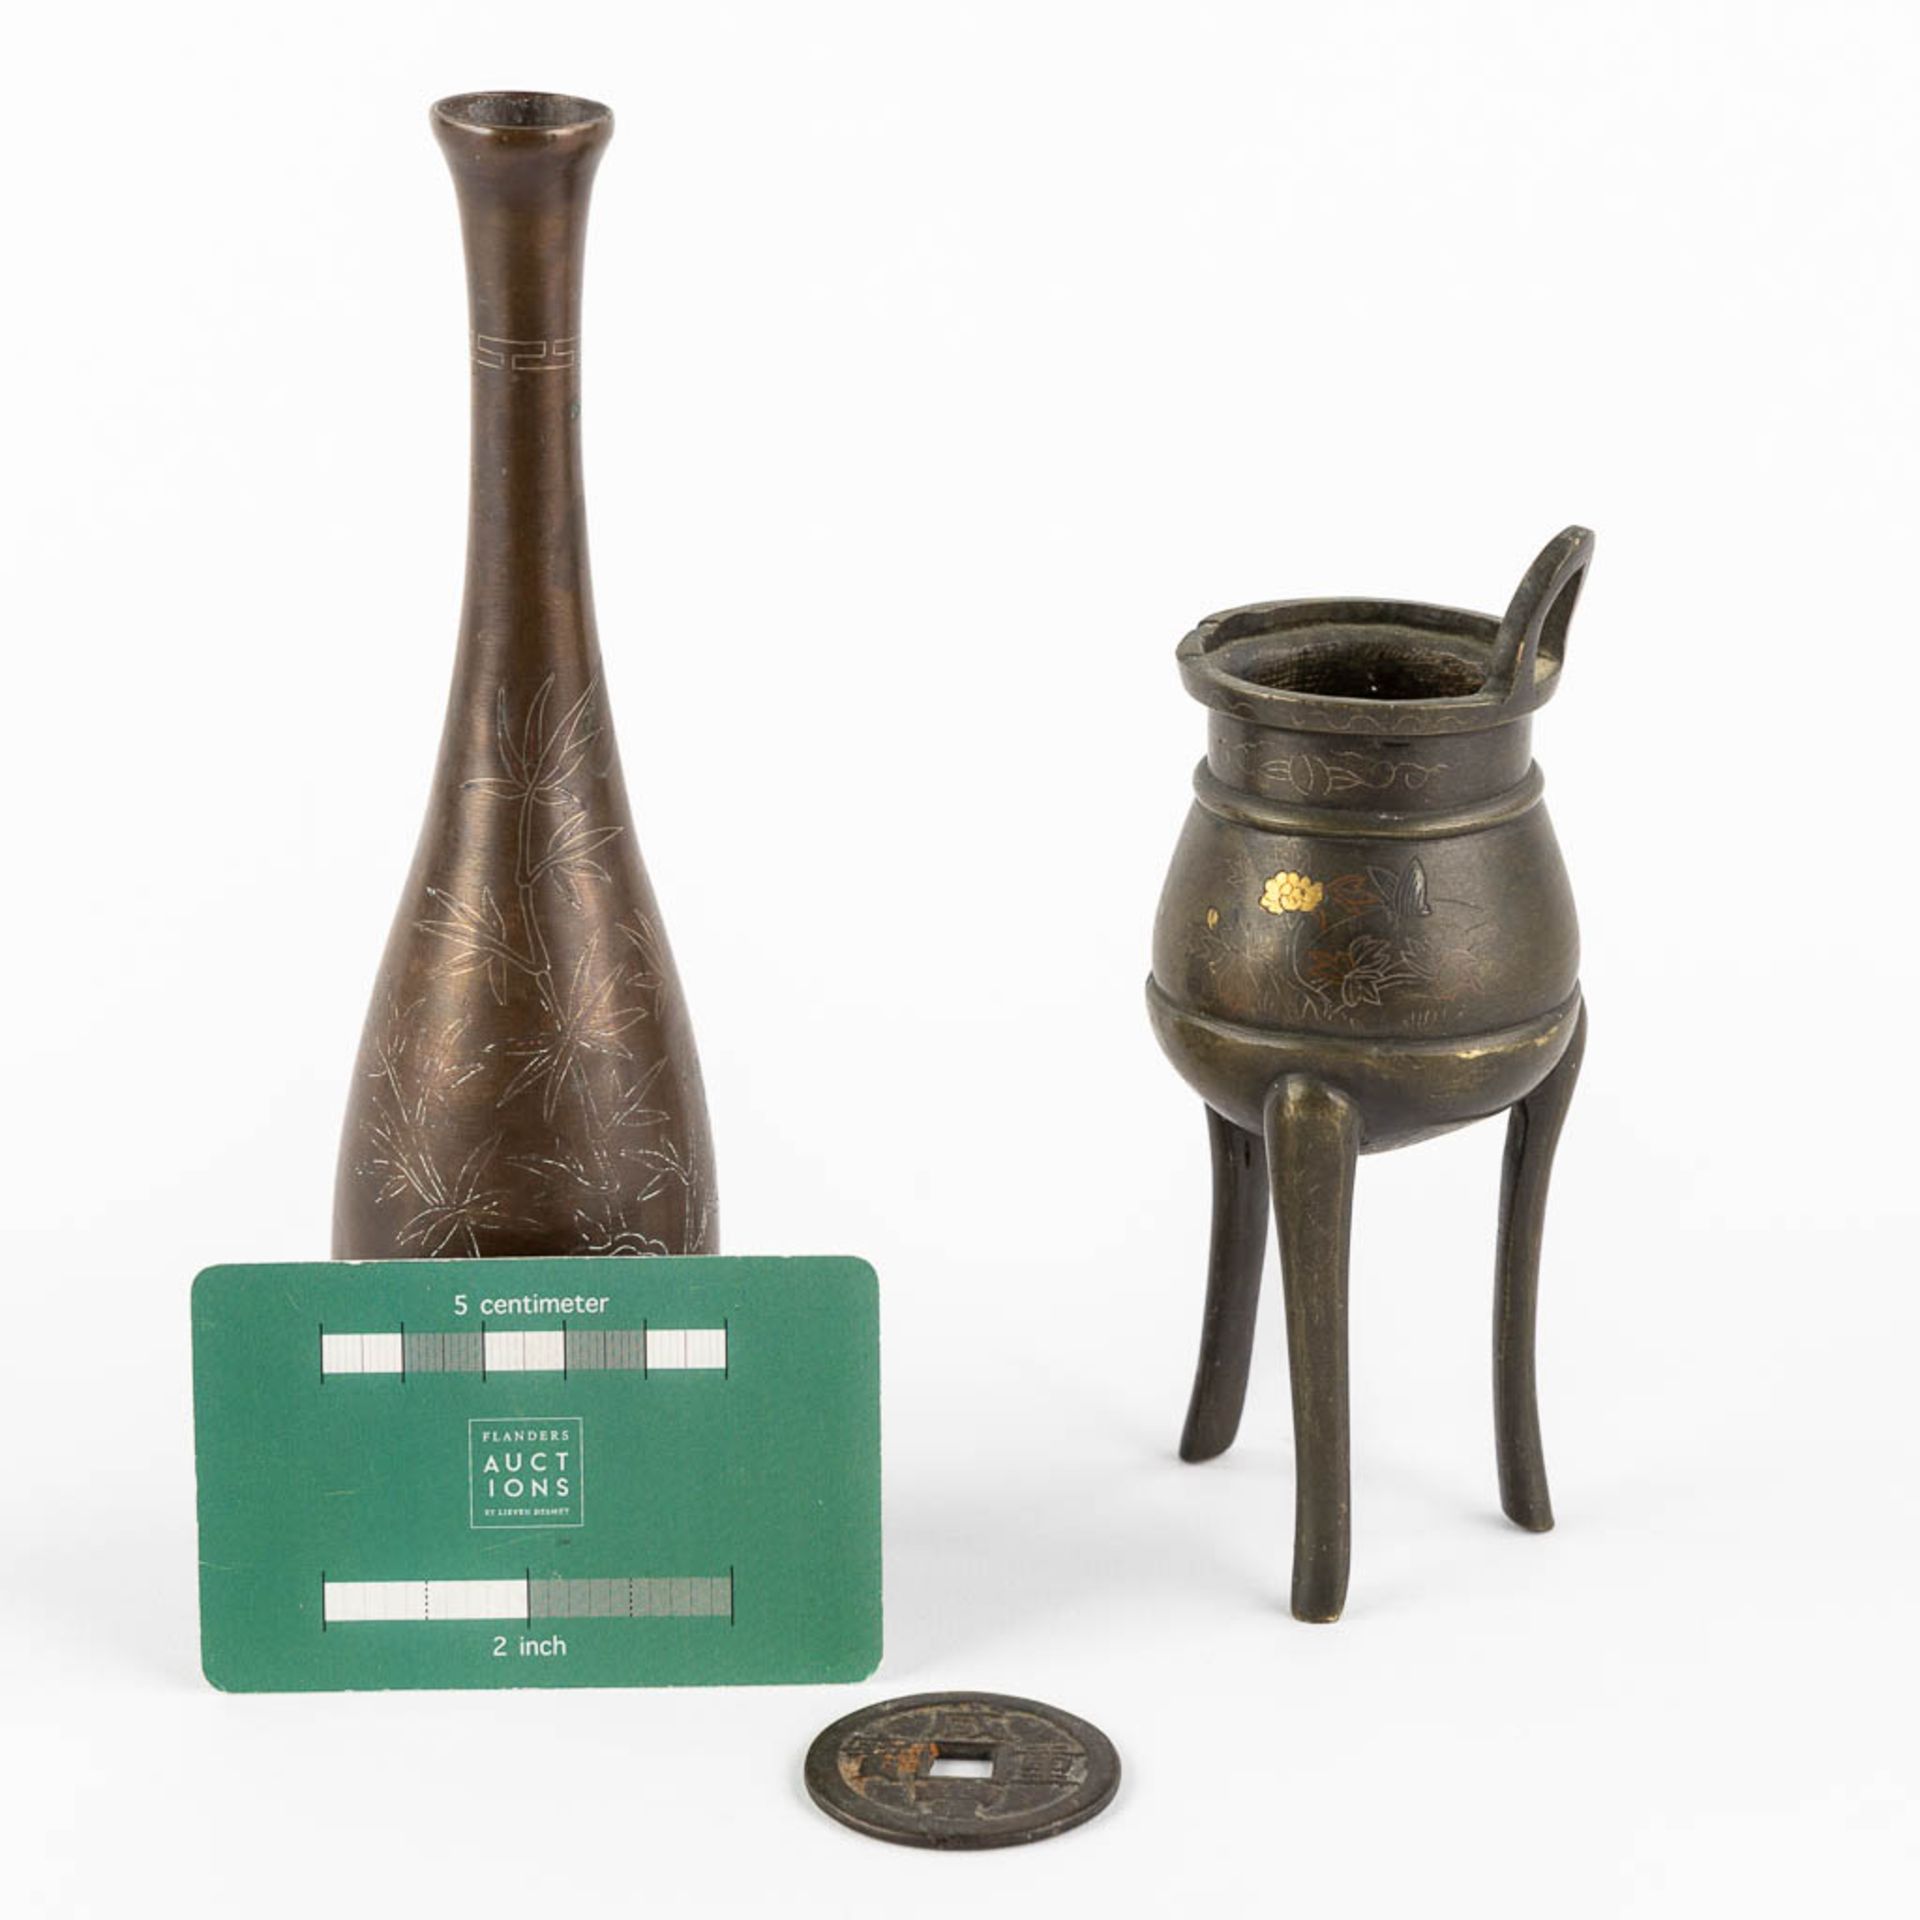 A Chinese insence burner, vase and a lucky coin. Bronze. (H:19 x D:5 cm) - Bild 2 aus 19